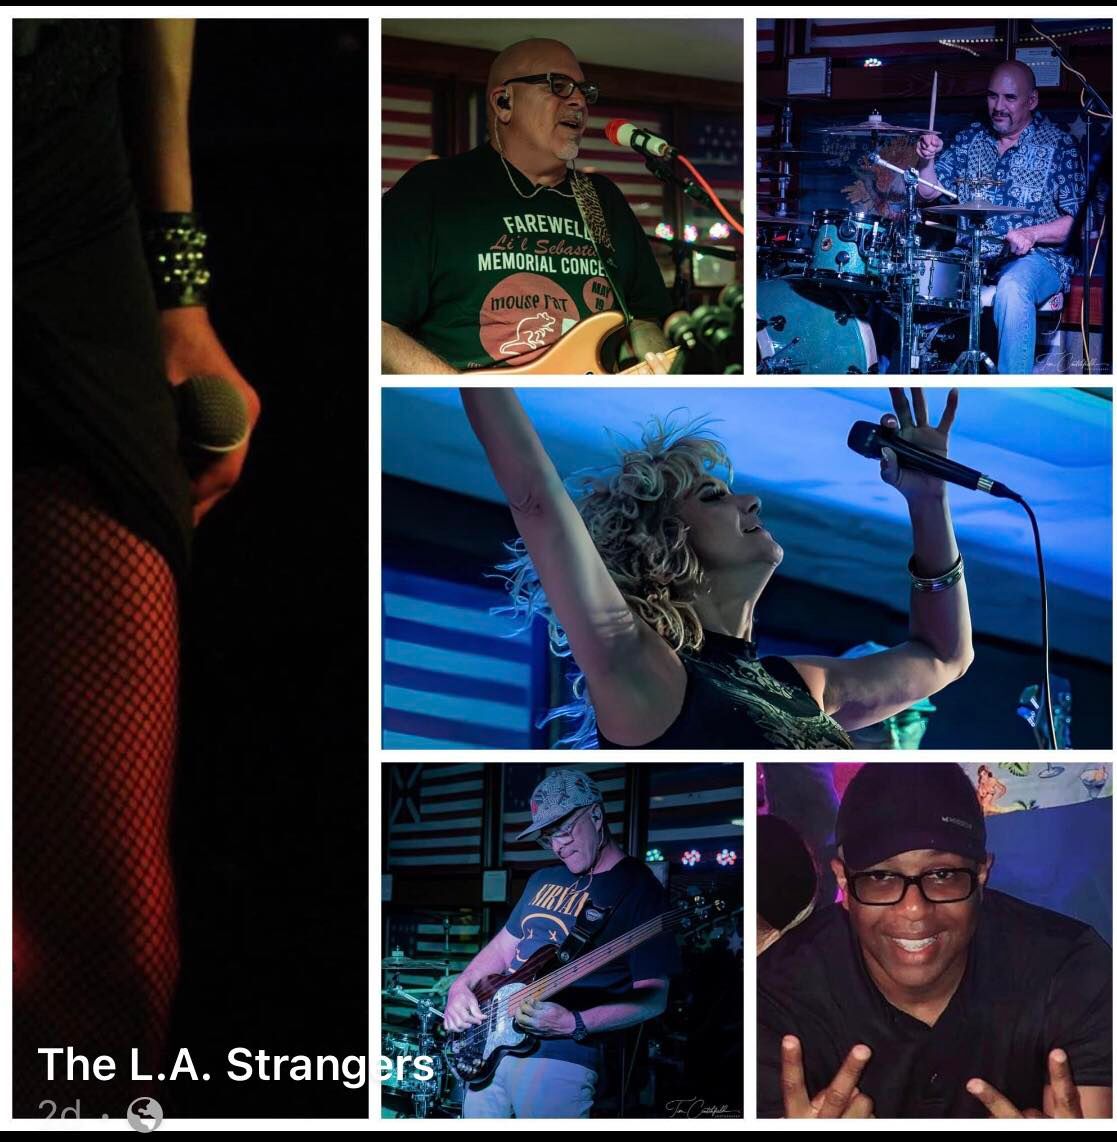 The L.A. Strangers @ The Pallet